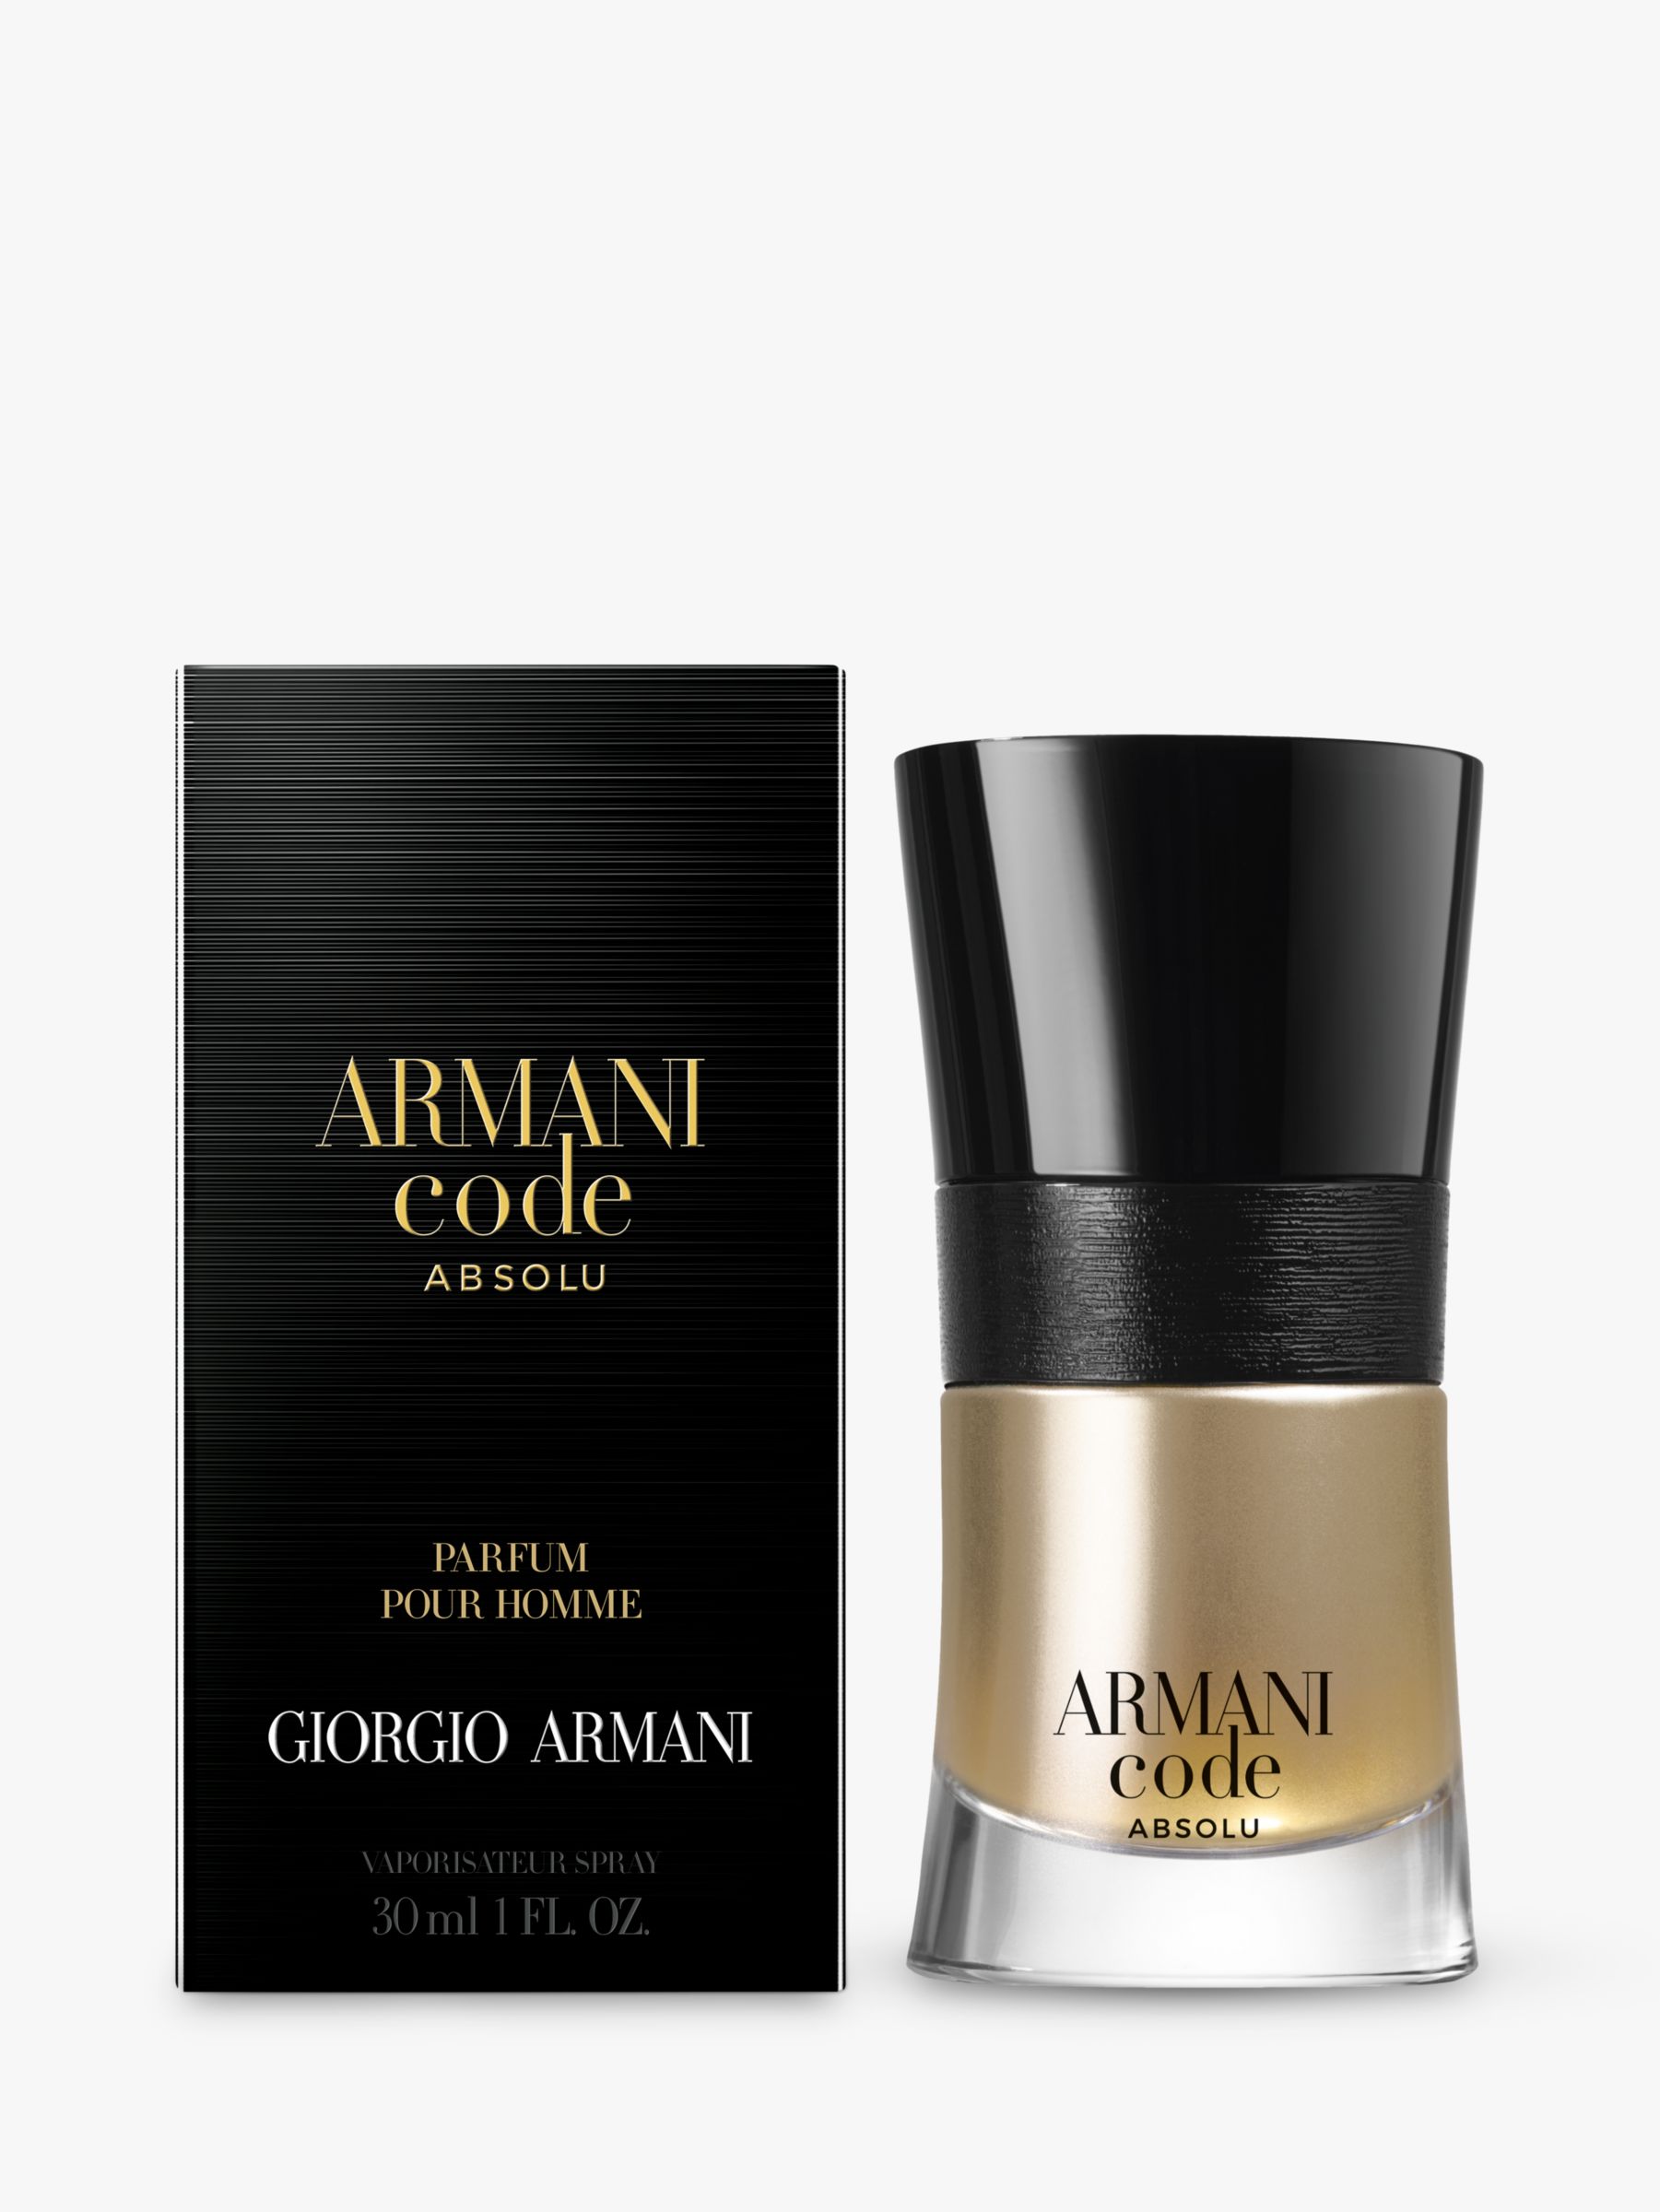 because is you emporio armani